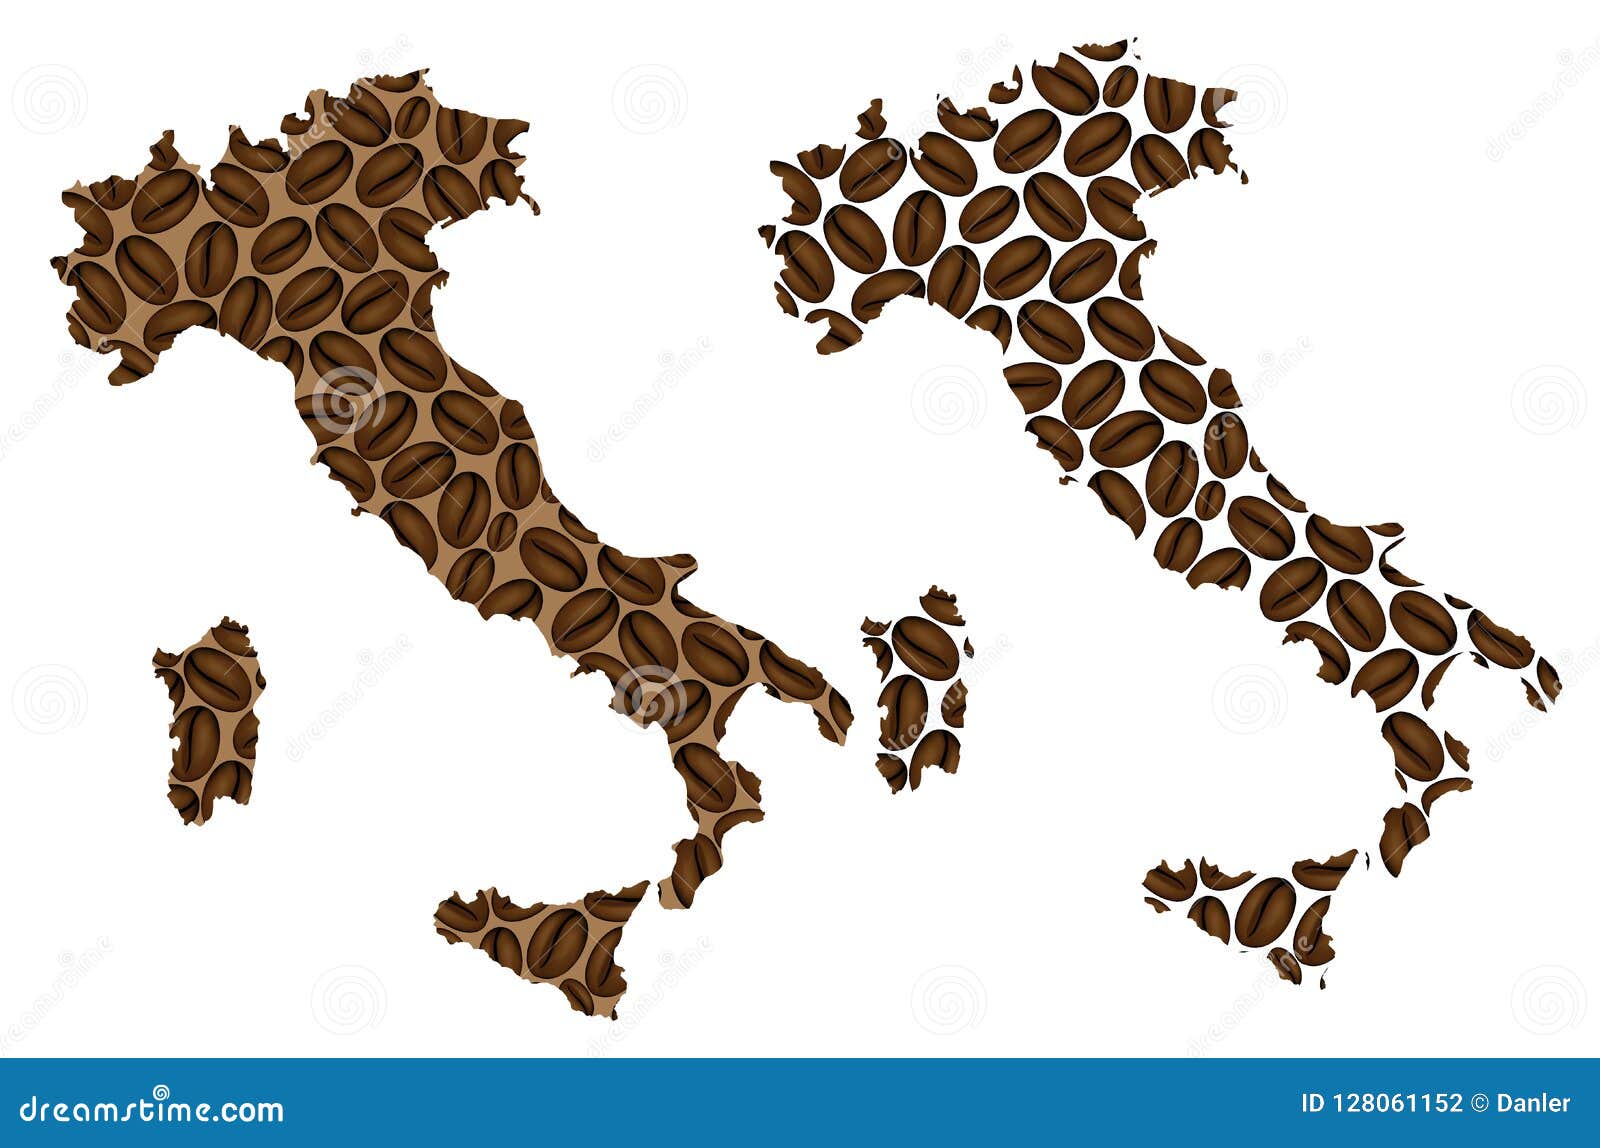 italy - map of coffee bean